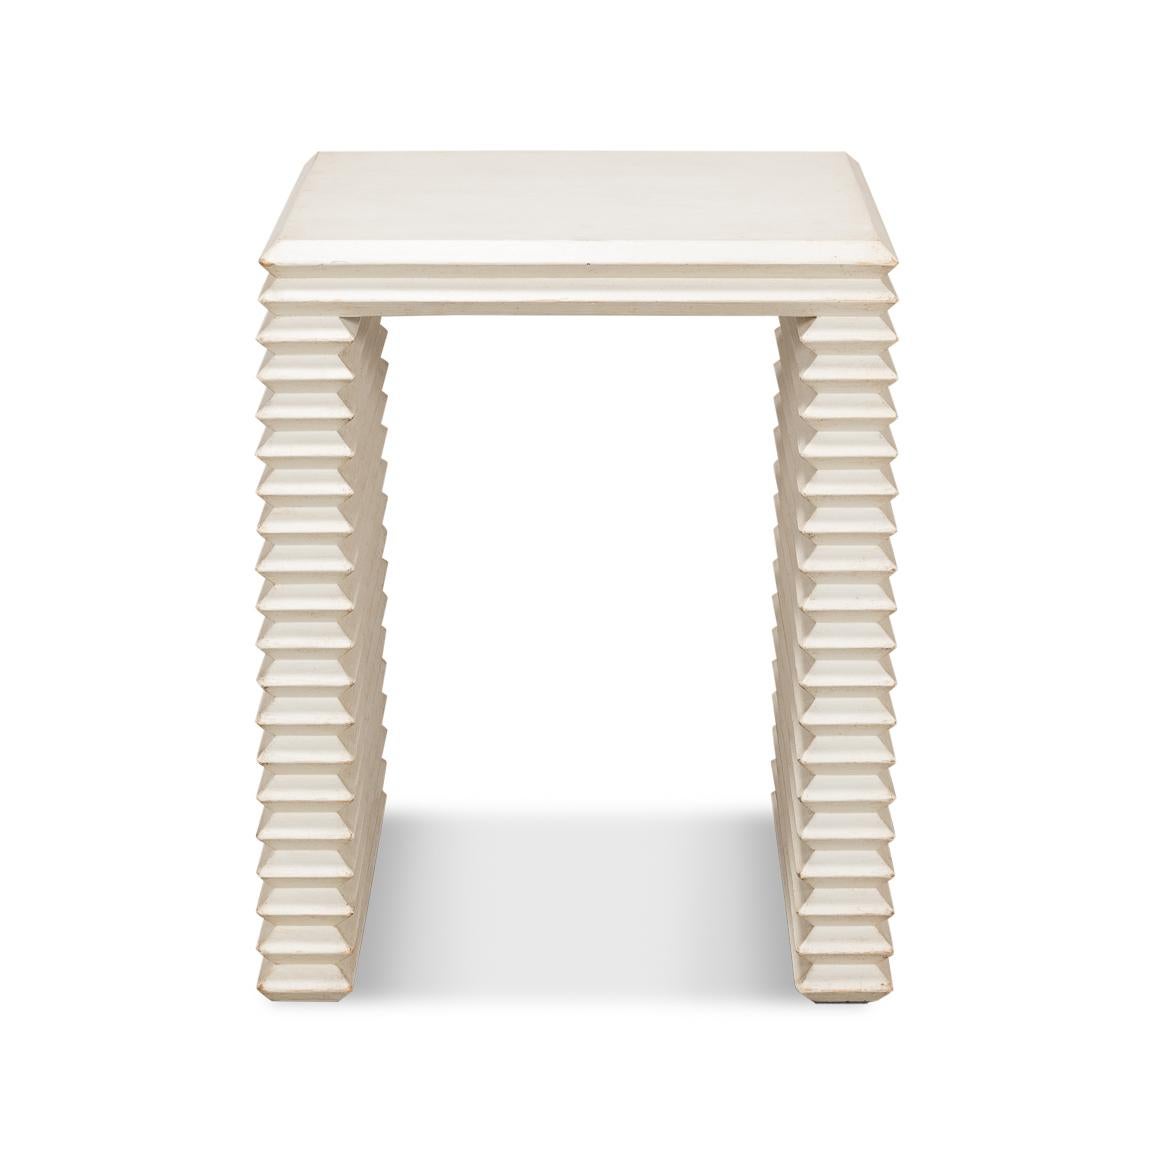 This unique piece brings a touch of artistic history into the heart of your living space.

The antique white finish on the wood softens the boldness of the form, making it a versatile addition to any room, whether it's standing solo or accompanied